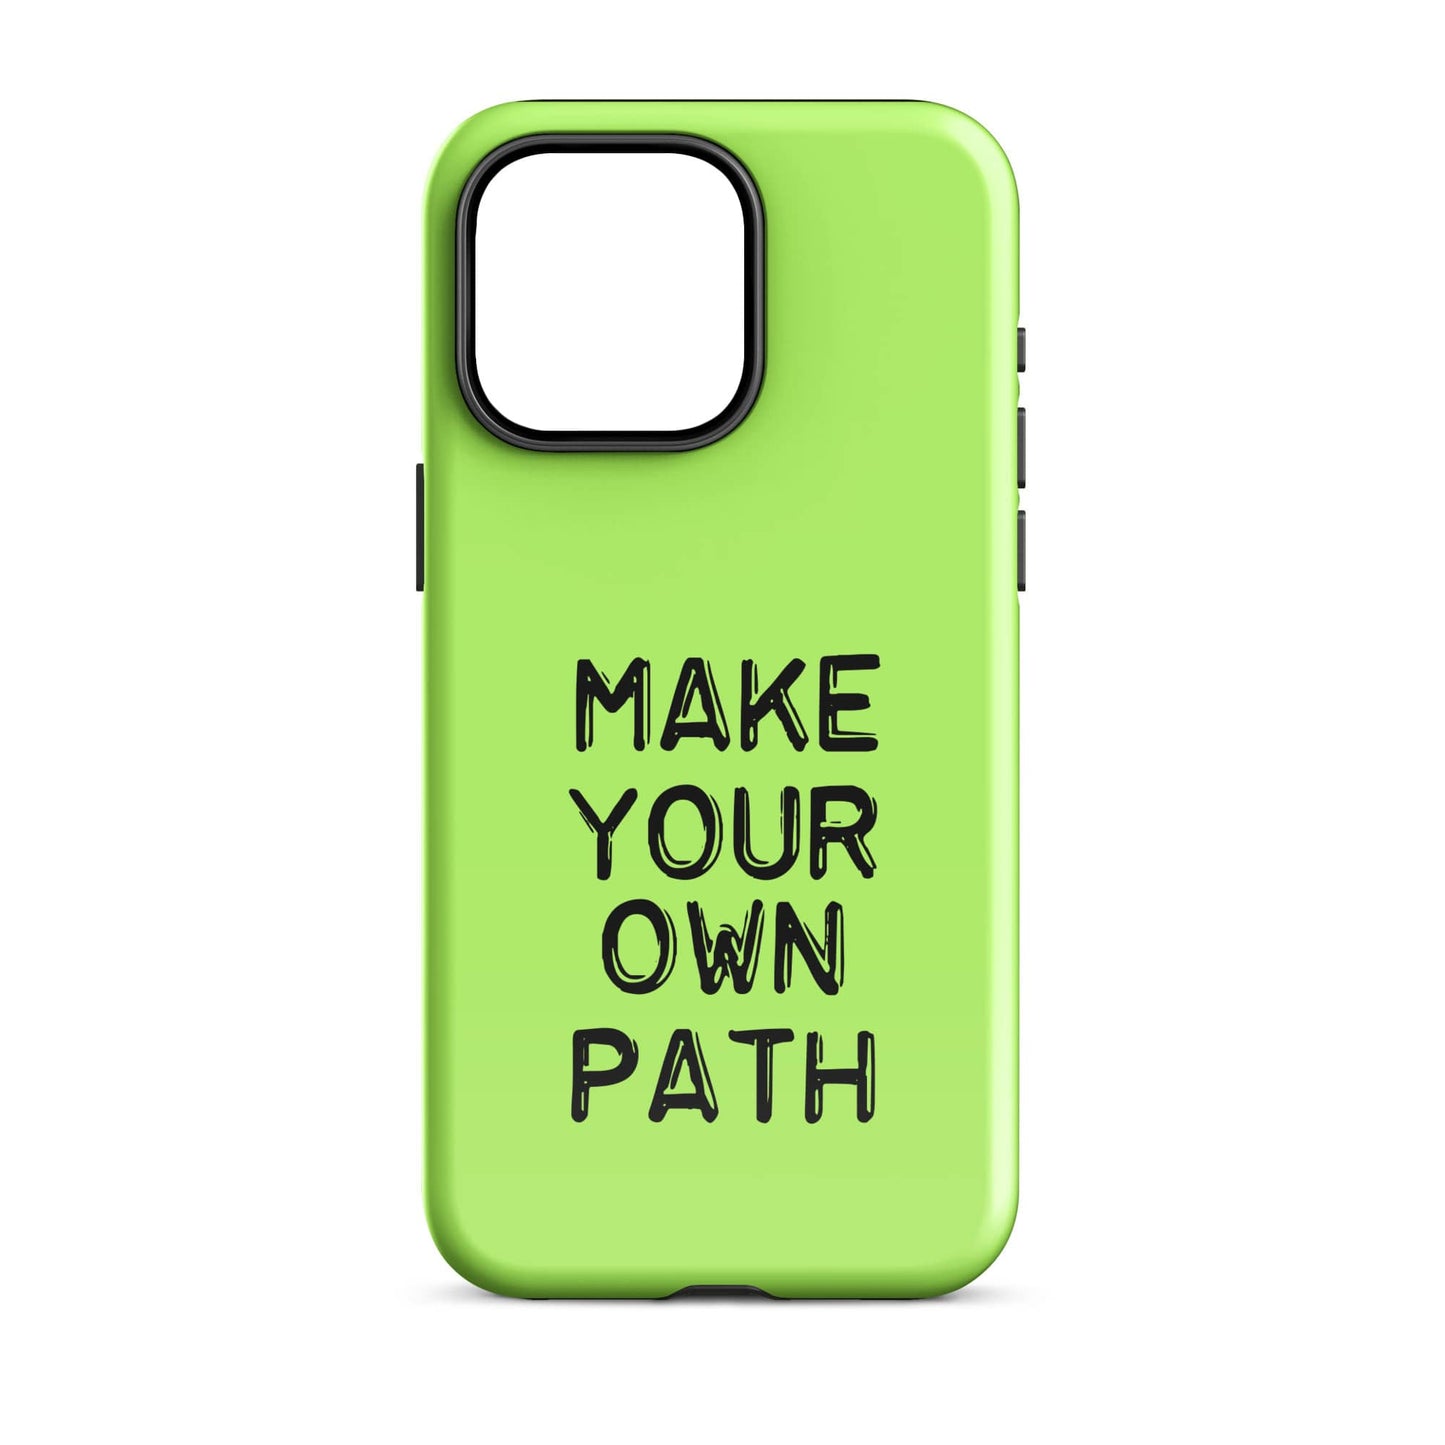 Make Your Own Path - (Lime Green) Quoted iPhone Case